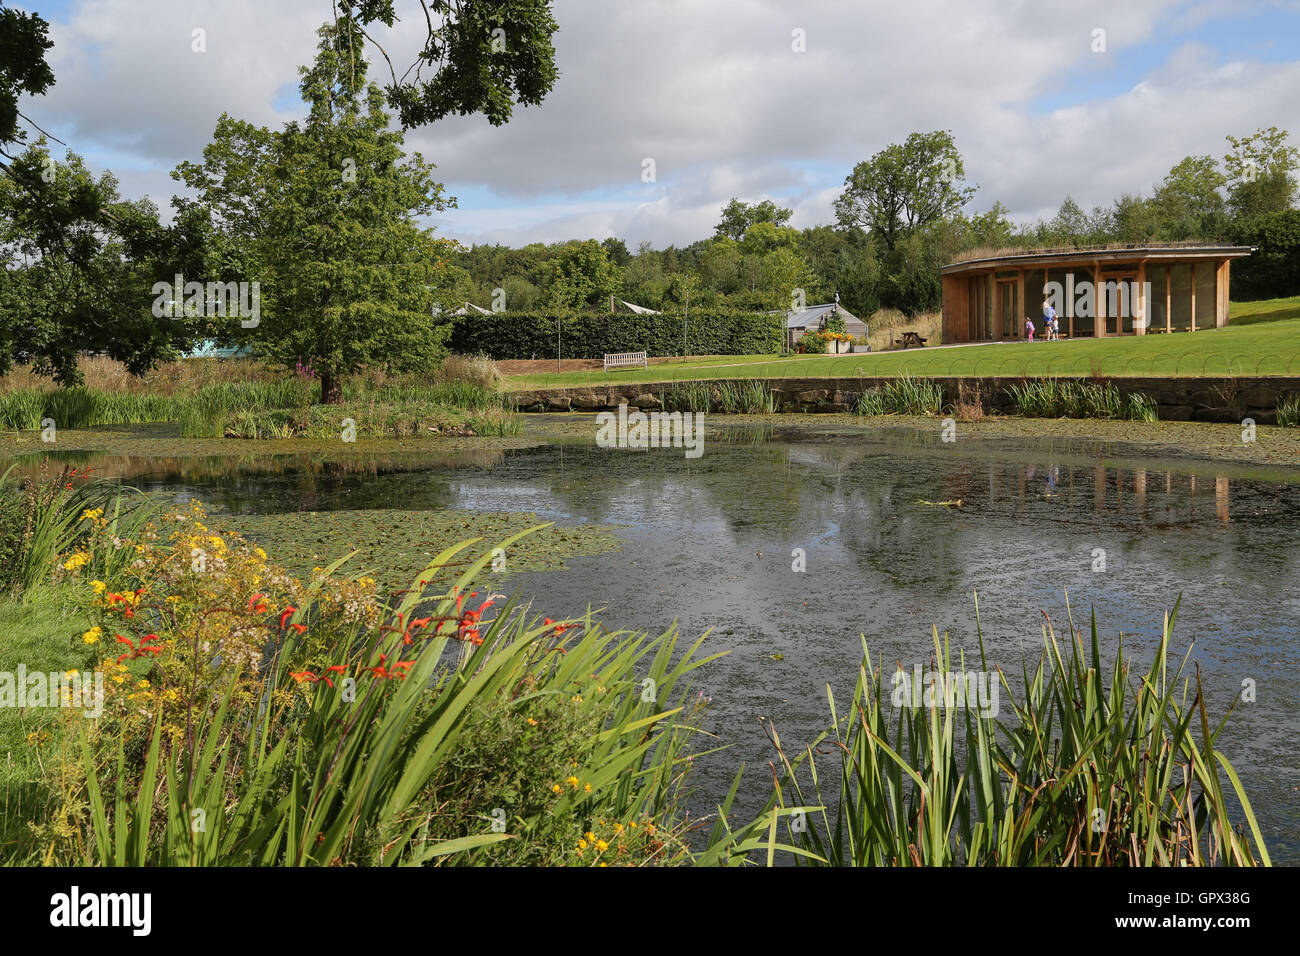 Harrogate, UK. The Queen Mother's lake at RHS Garden Harlow Carr in Harrogate, North Yorkshire. Today marks the first day of aut Stock Photo